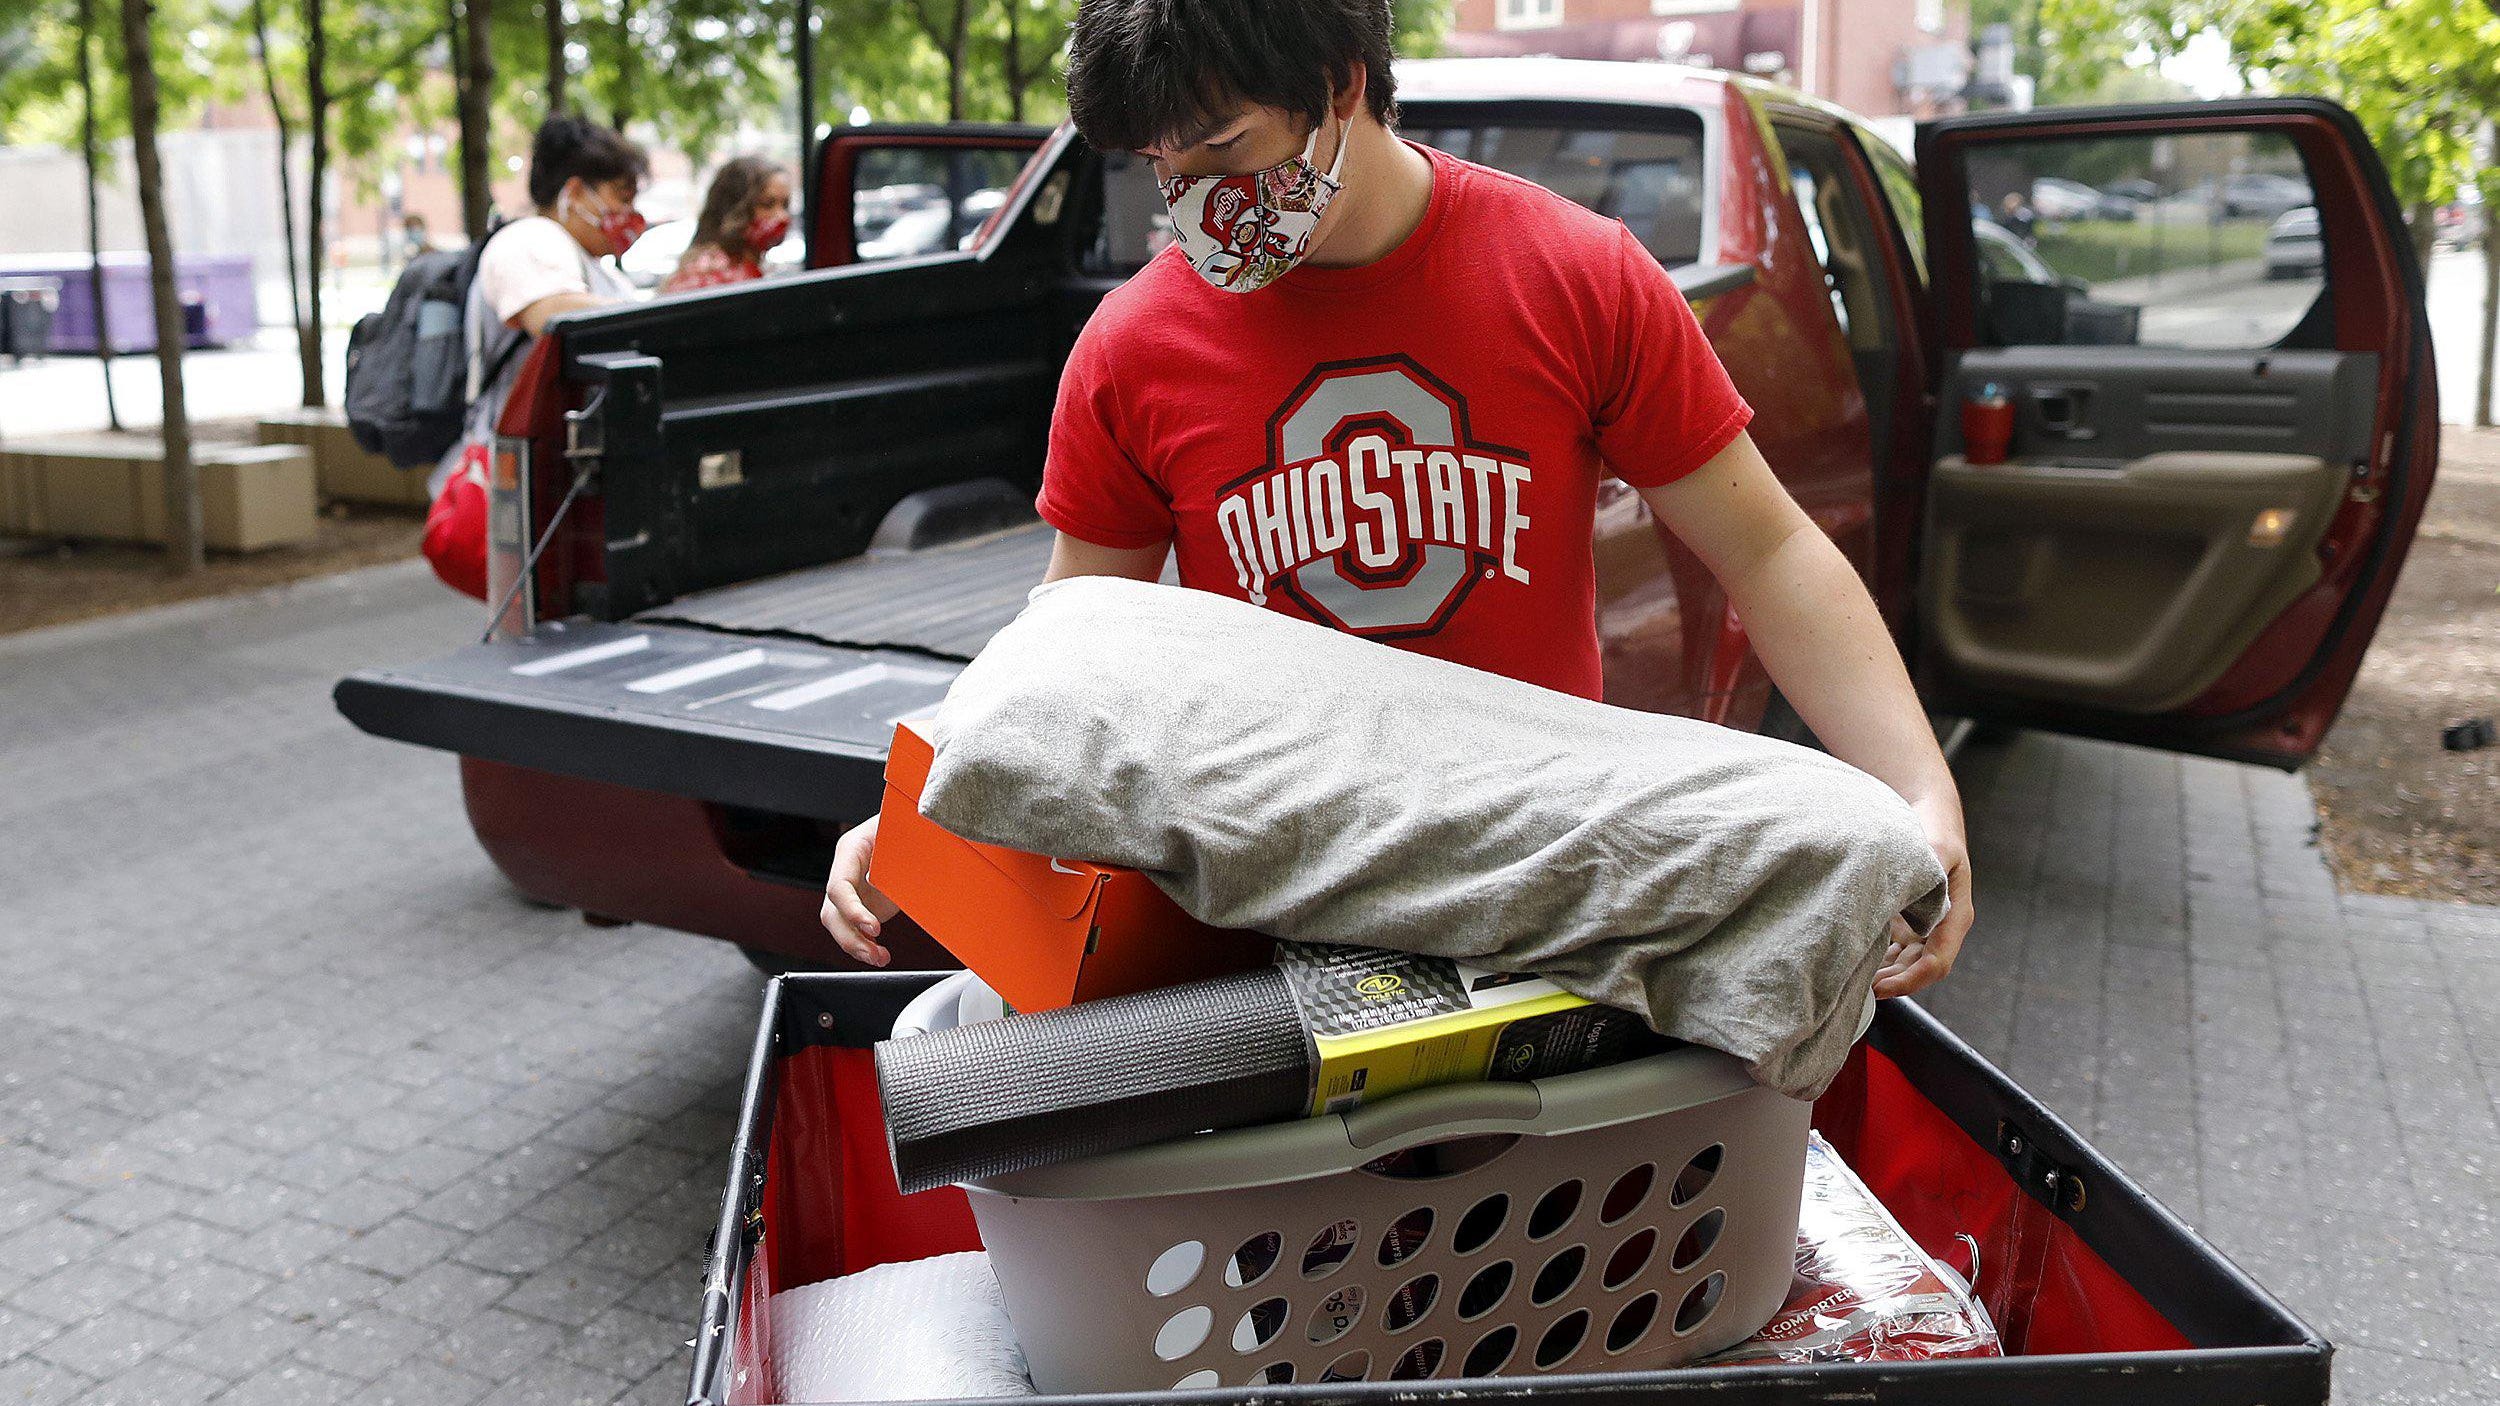 Ohio State movein day comes with lots of questions, no football